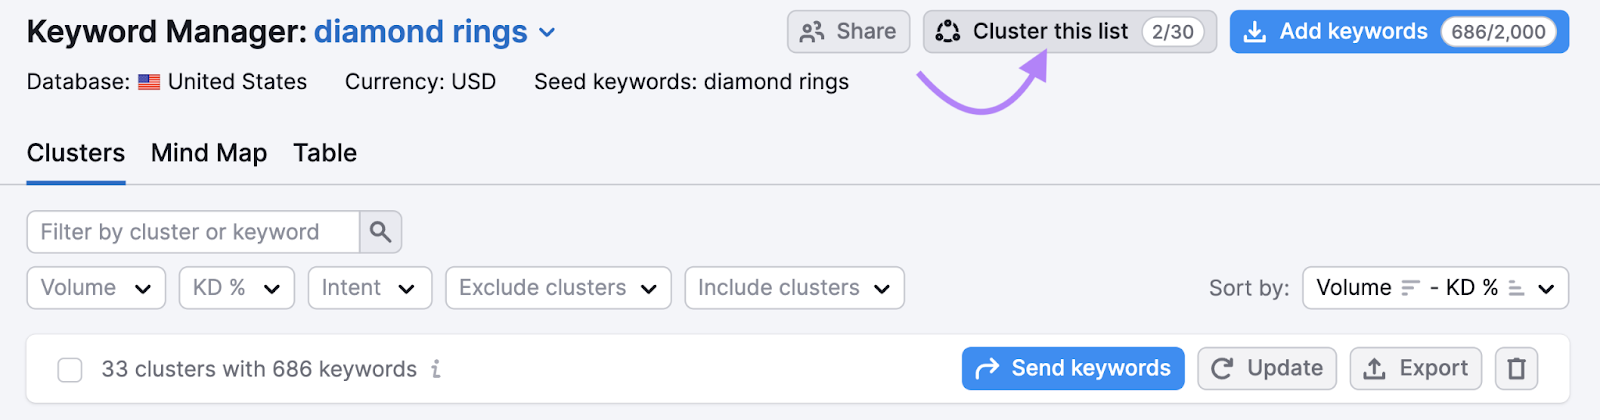 The "Cluster this list" button at the top of the page in Keyword Manager